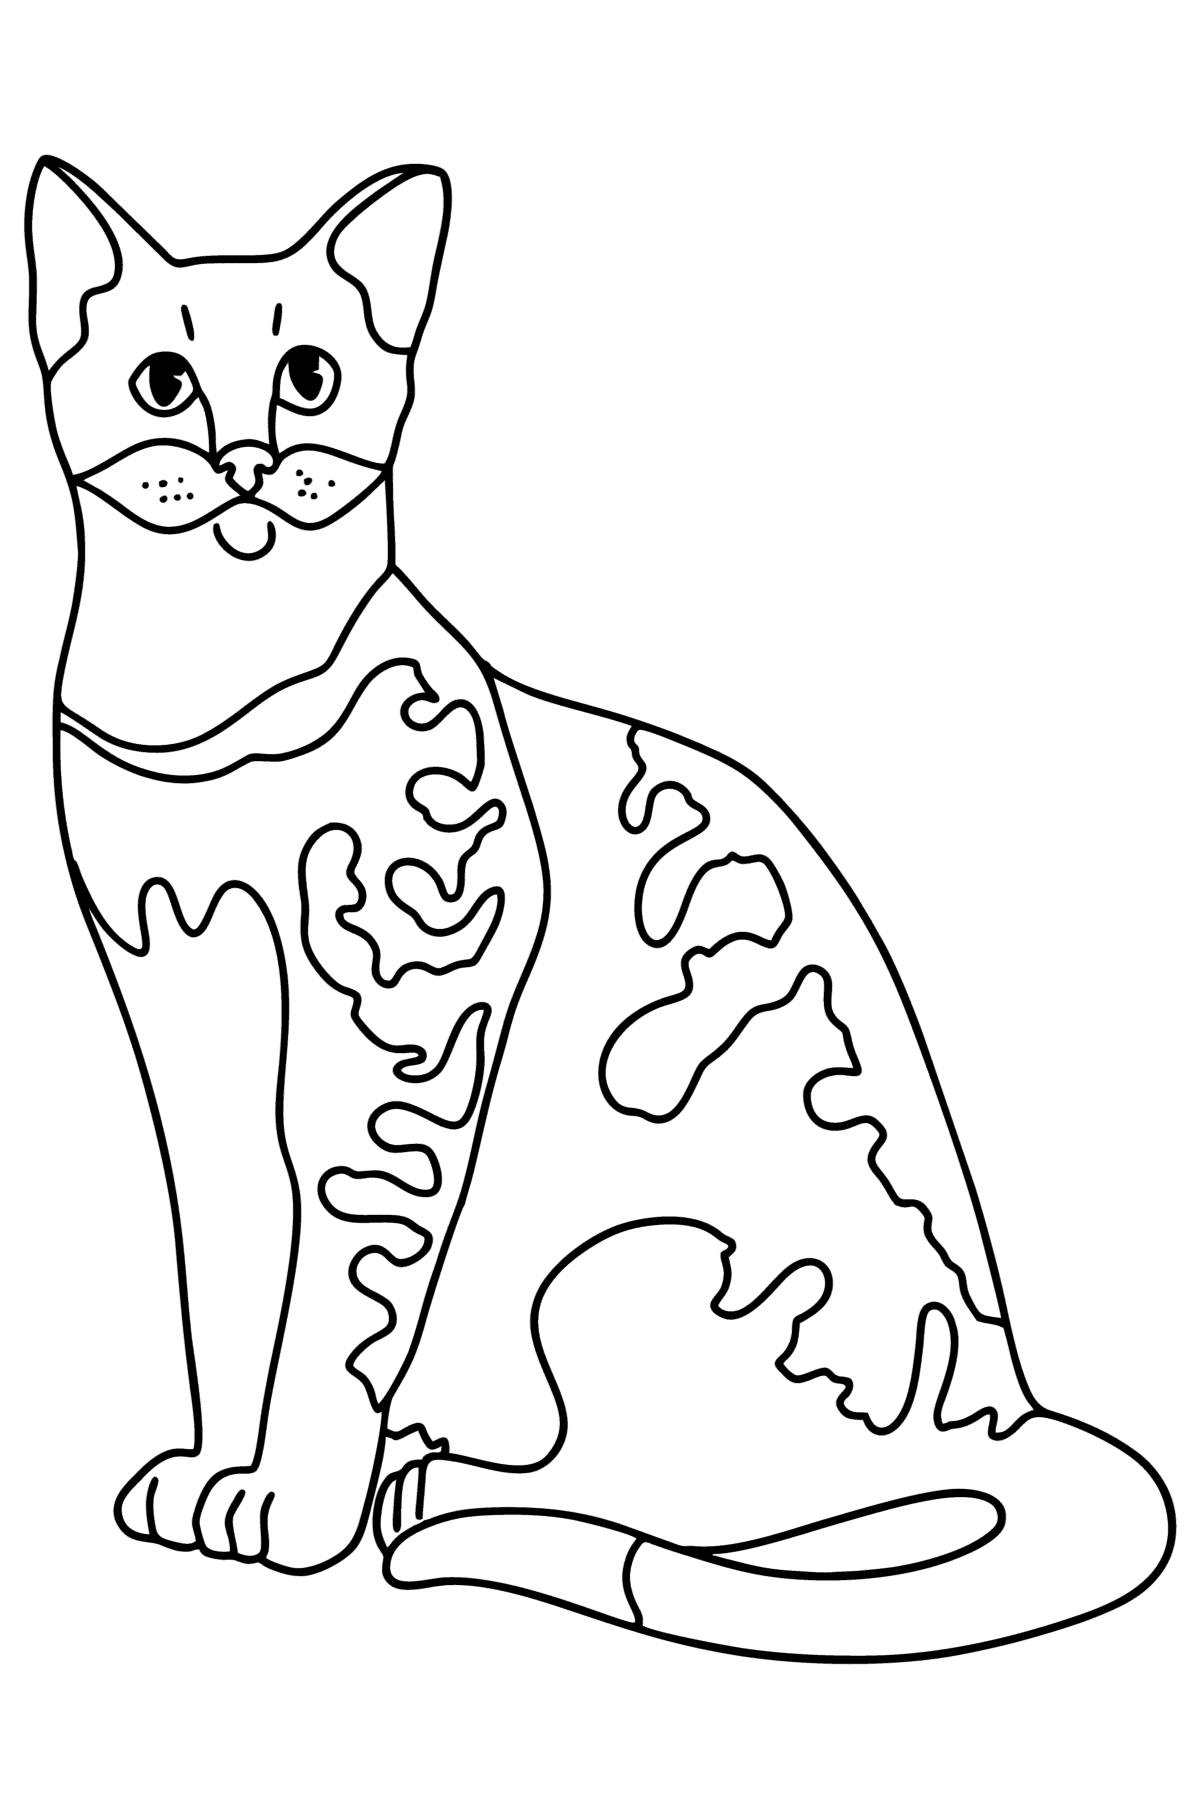 Egyptian Mau Cat coloring page - Coloring Pages for Kids